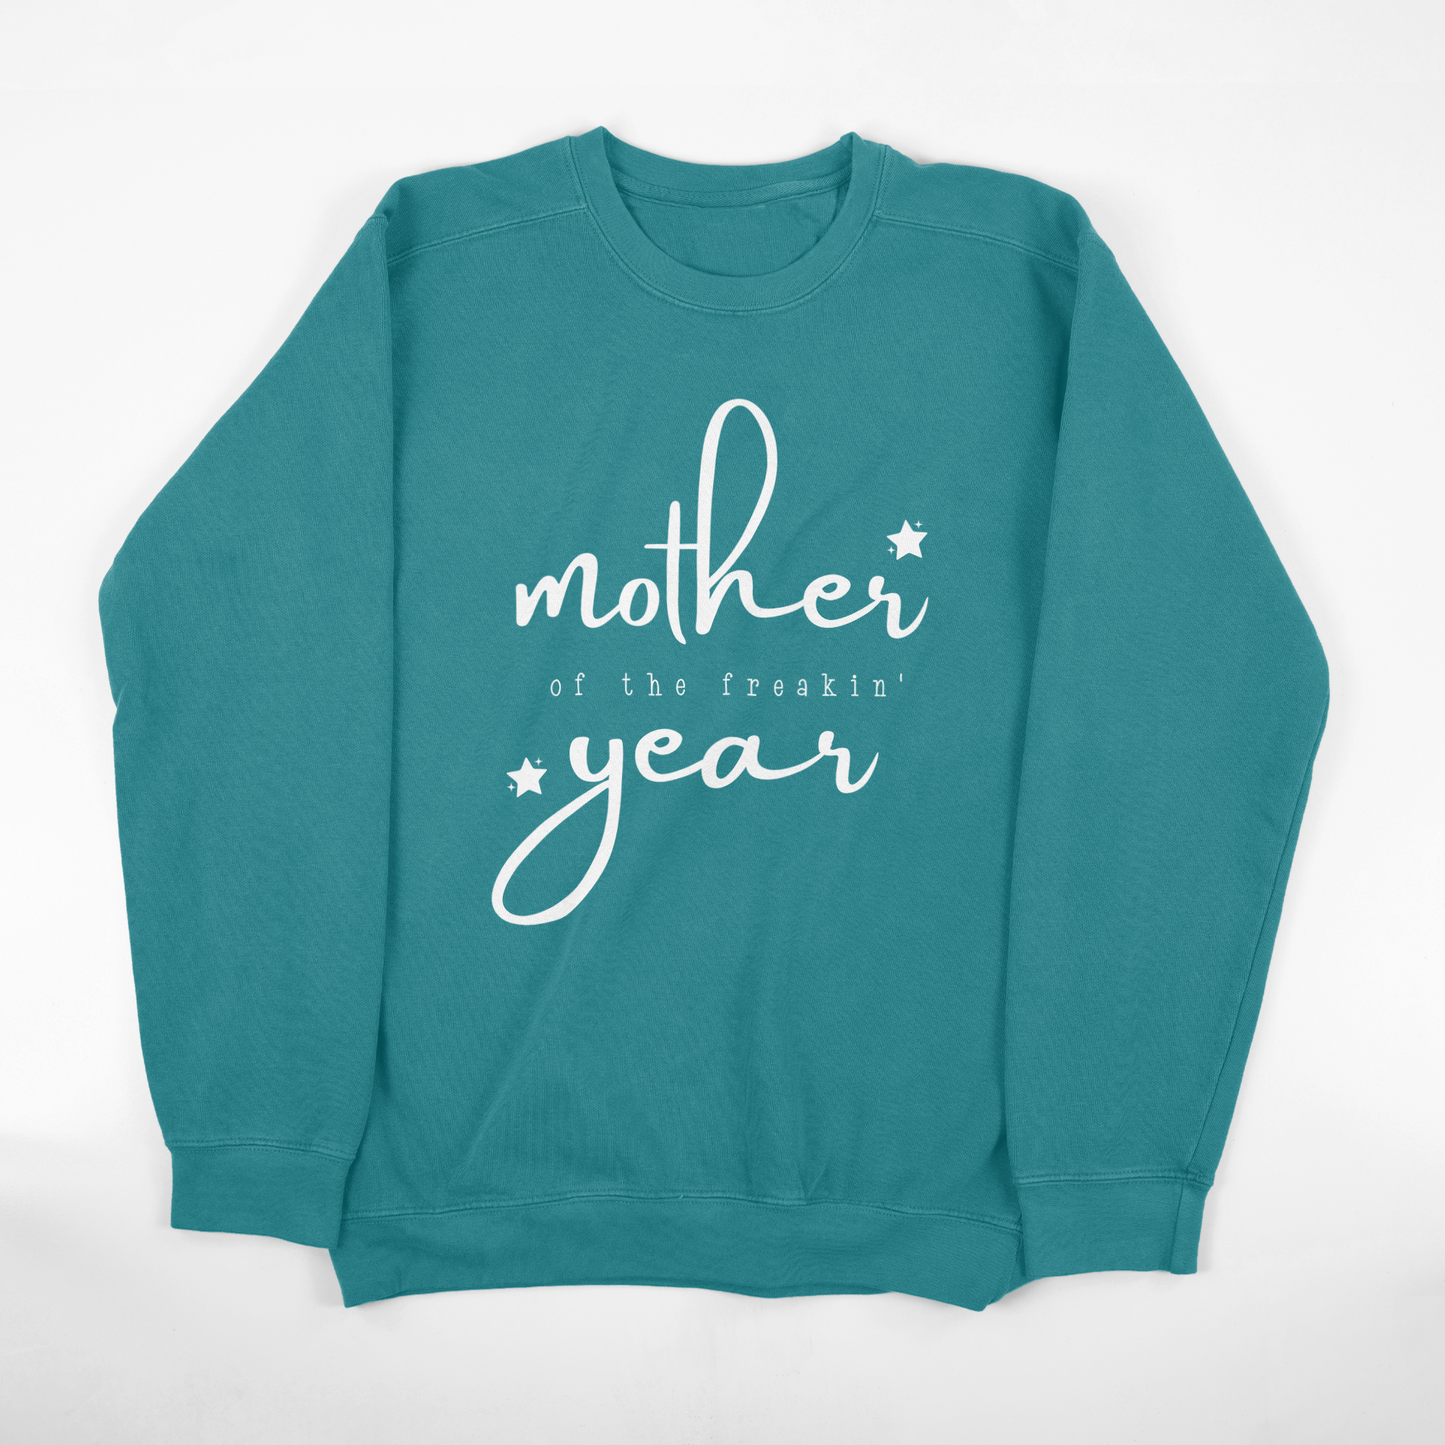 Mother of the Freakin' Year Crewneck